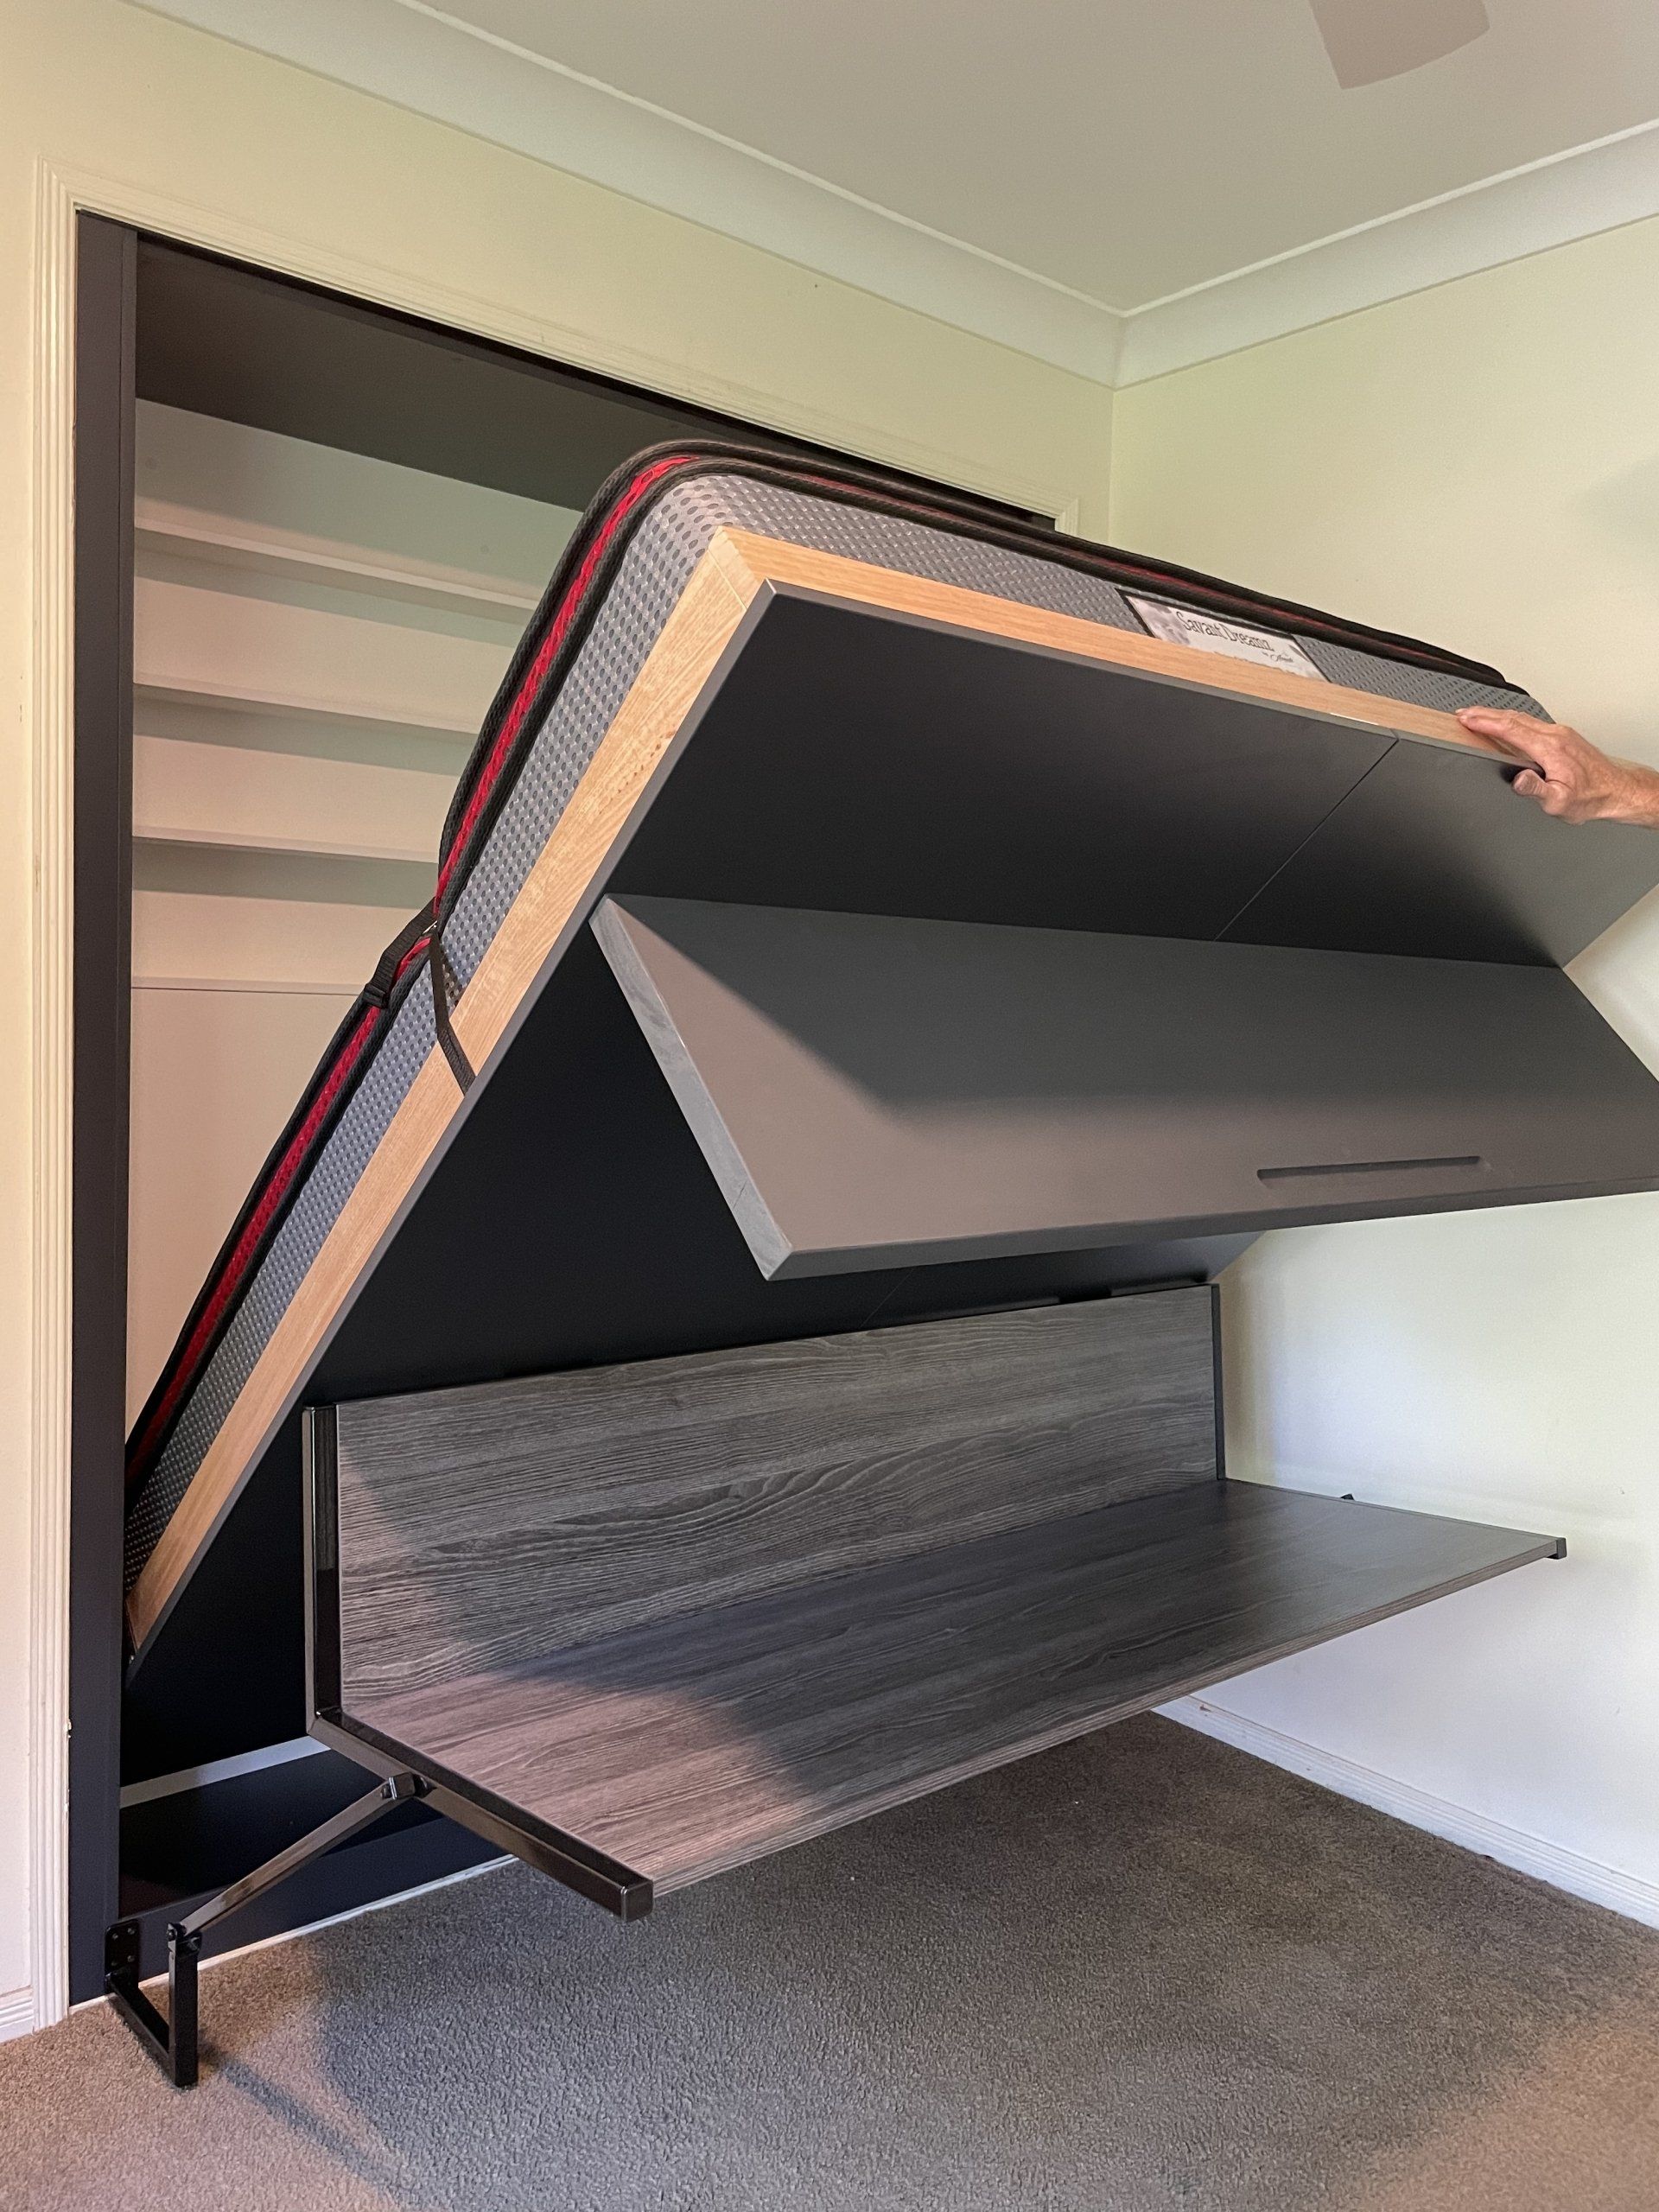 Custom wall bed in niche with desk and solid shelf BED SPACE DESIGN